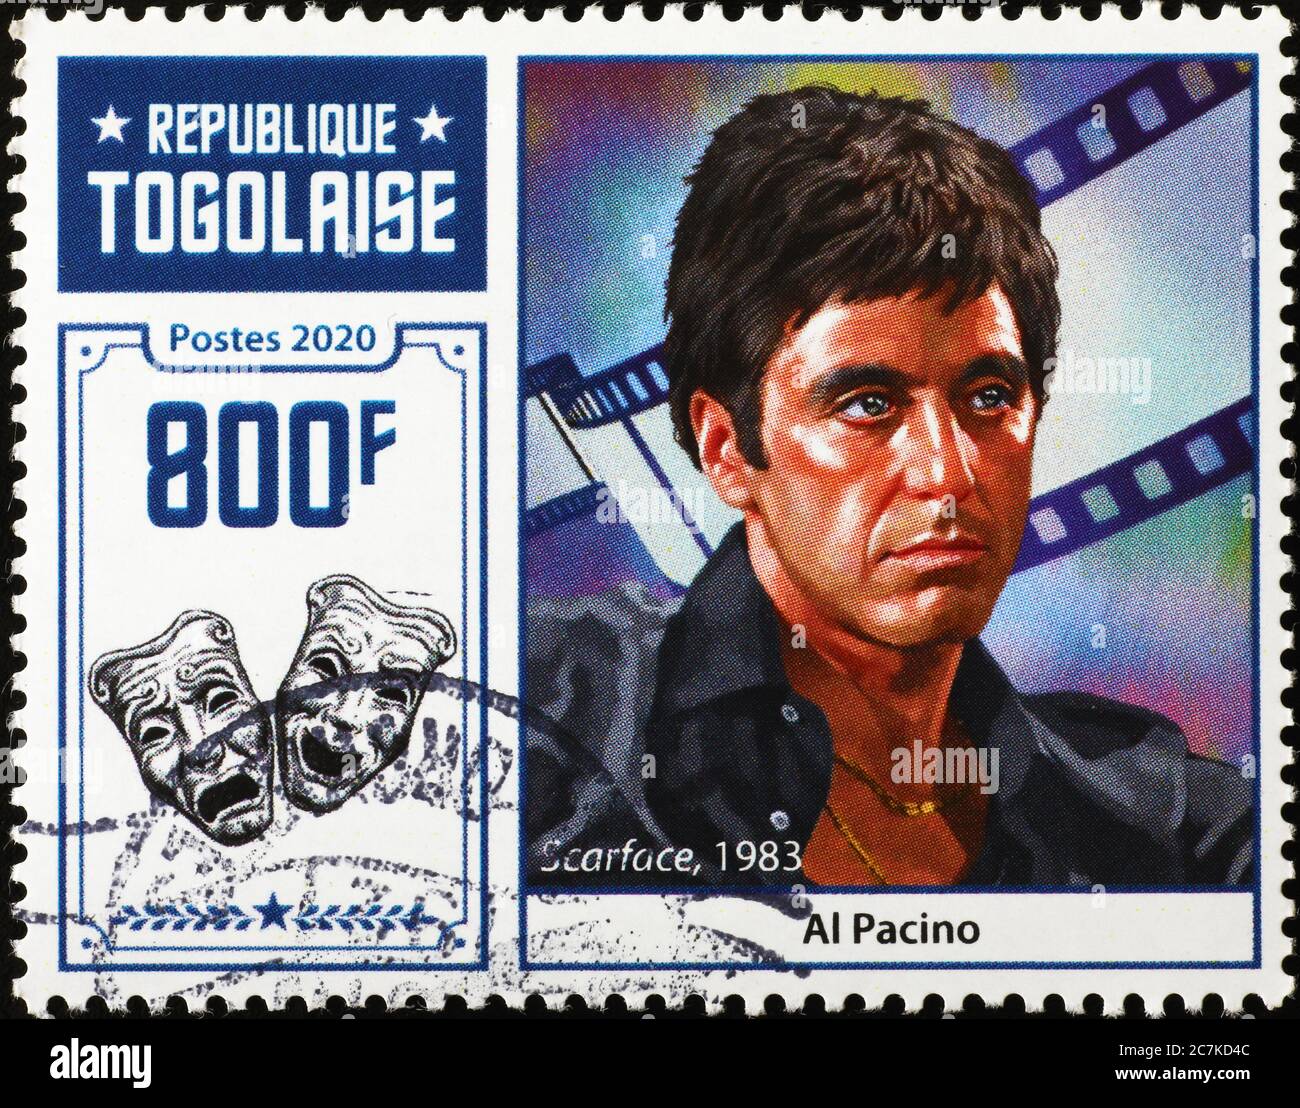 Al Pacino as Scarface on postage stamp Stock Photo